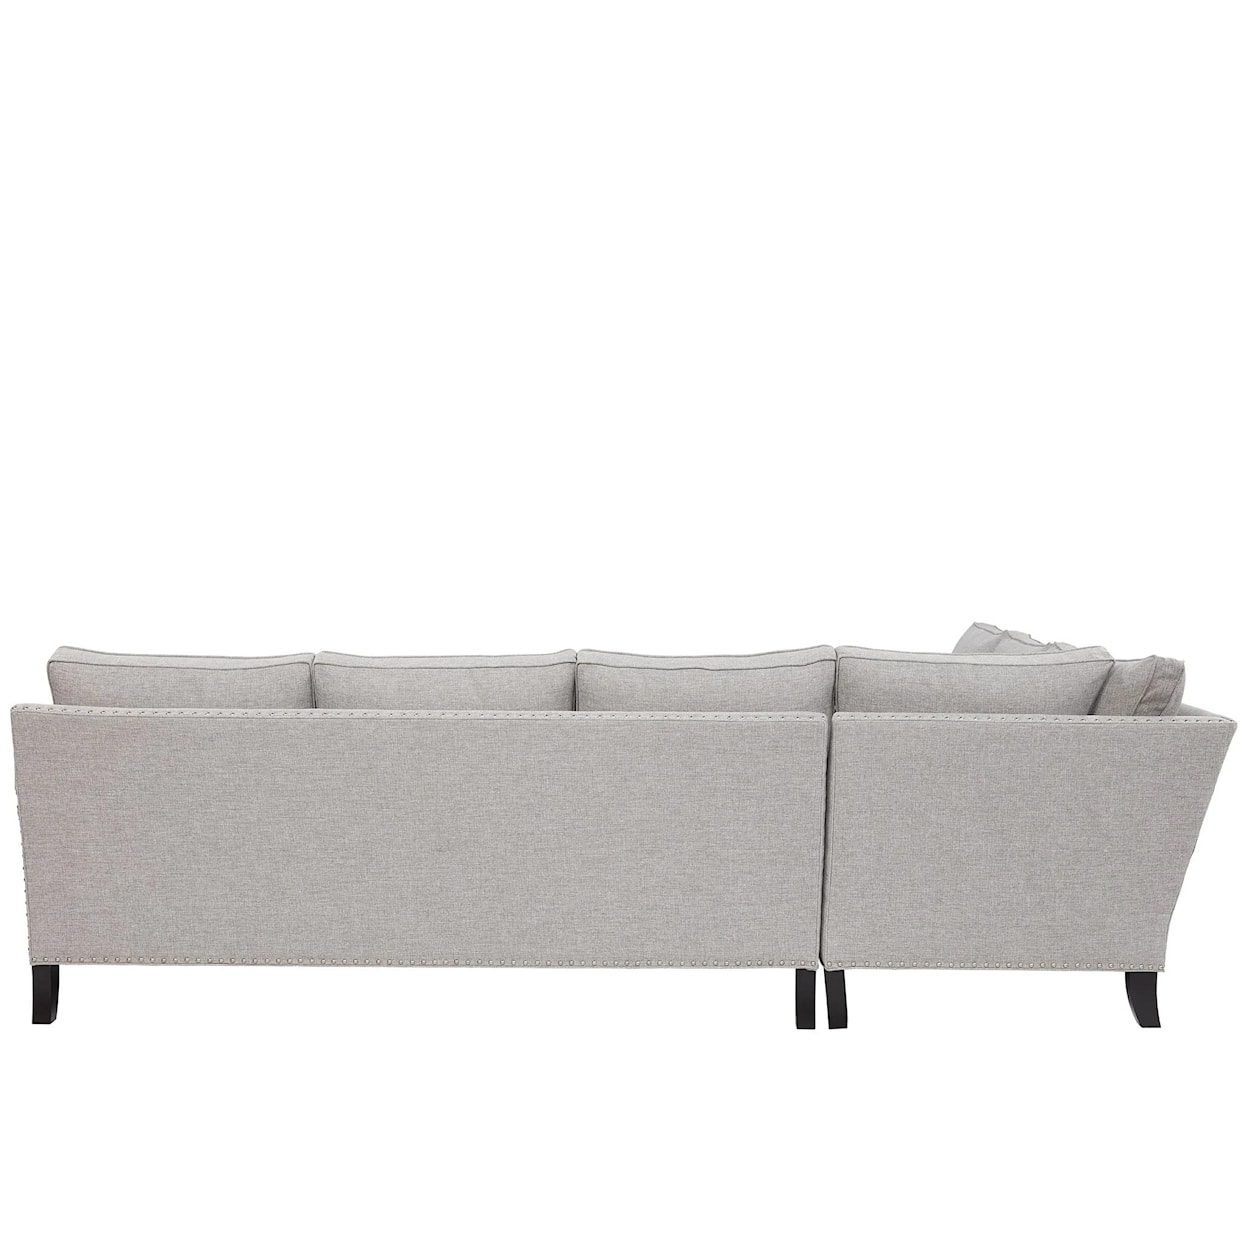 Universal Special Order Sectional